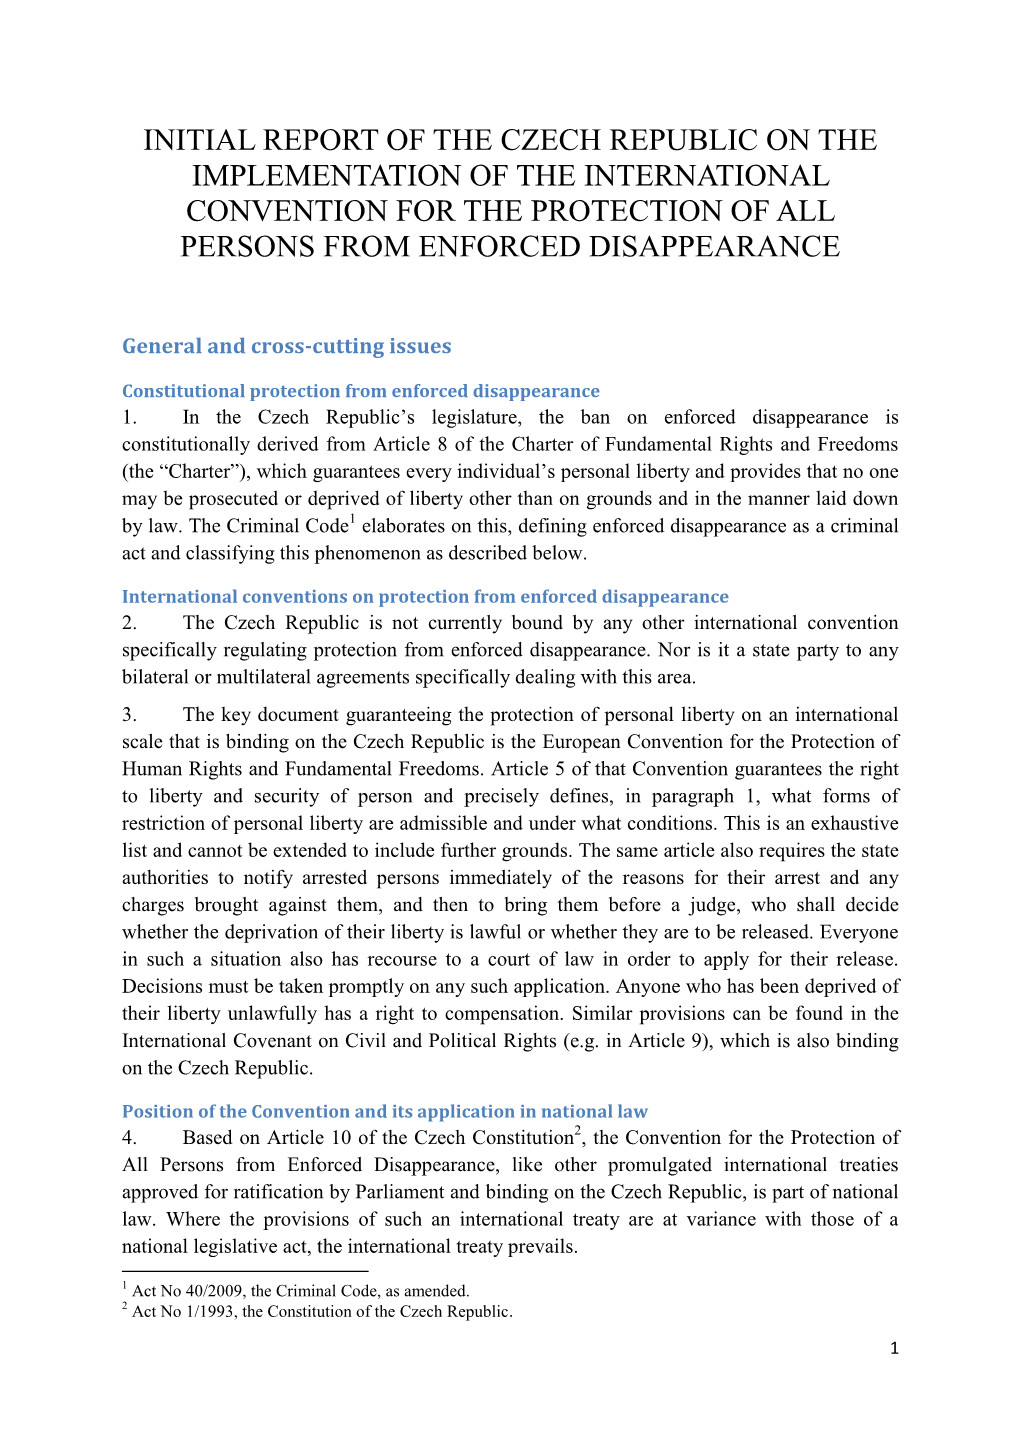 Initial Report of the Czech Republic on the Implementation of the International Convention for the Protection of All Persons from Enforced Disappearance